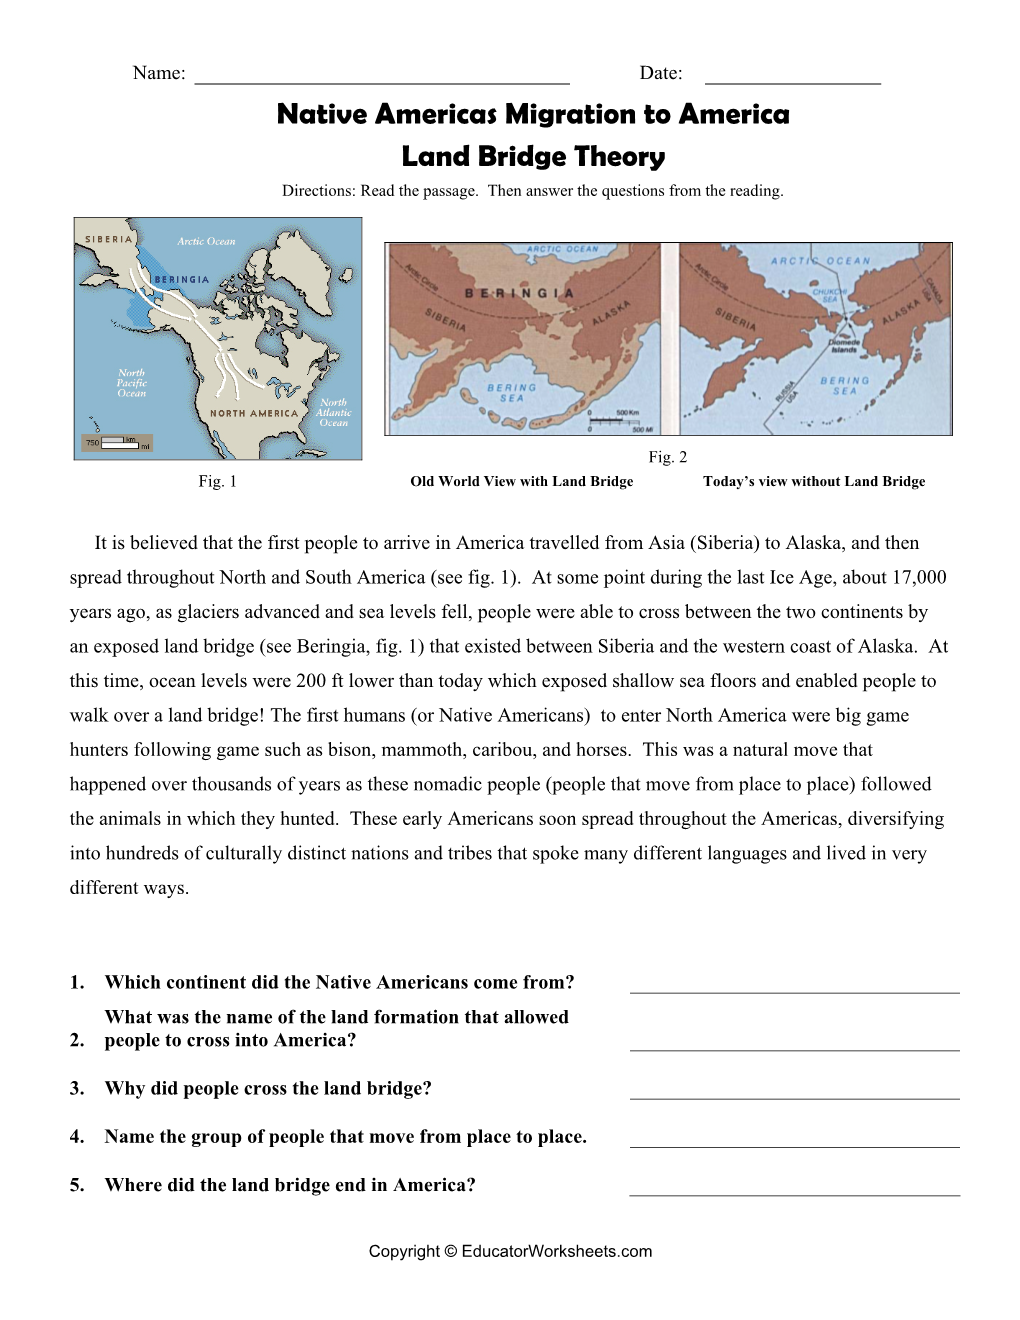 Native Americas Migration to America Land Bridge Theory Directions: Read the Passage